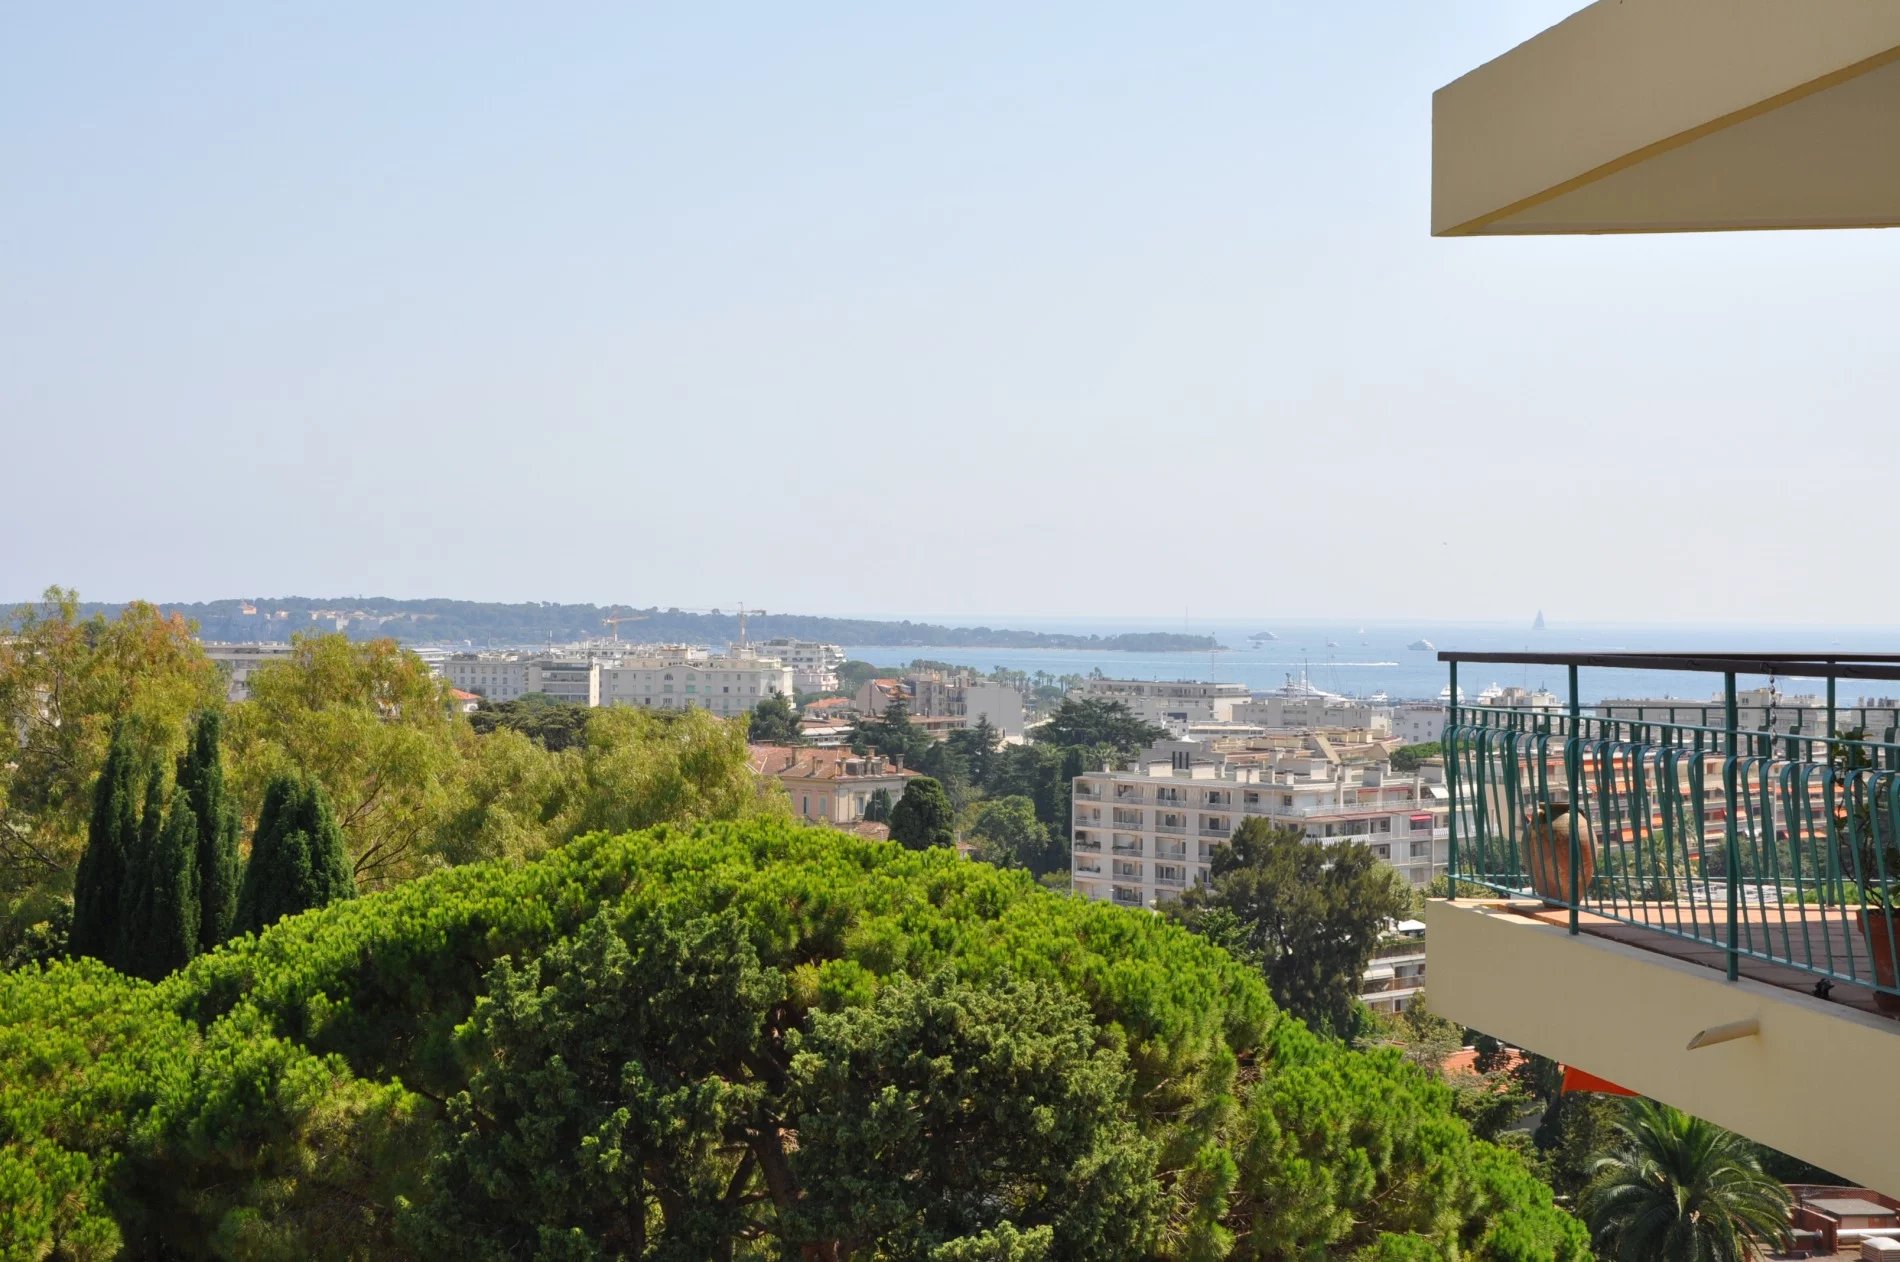 3 bedroom 5th floor apartment with lovely seaview